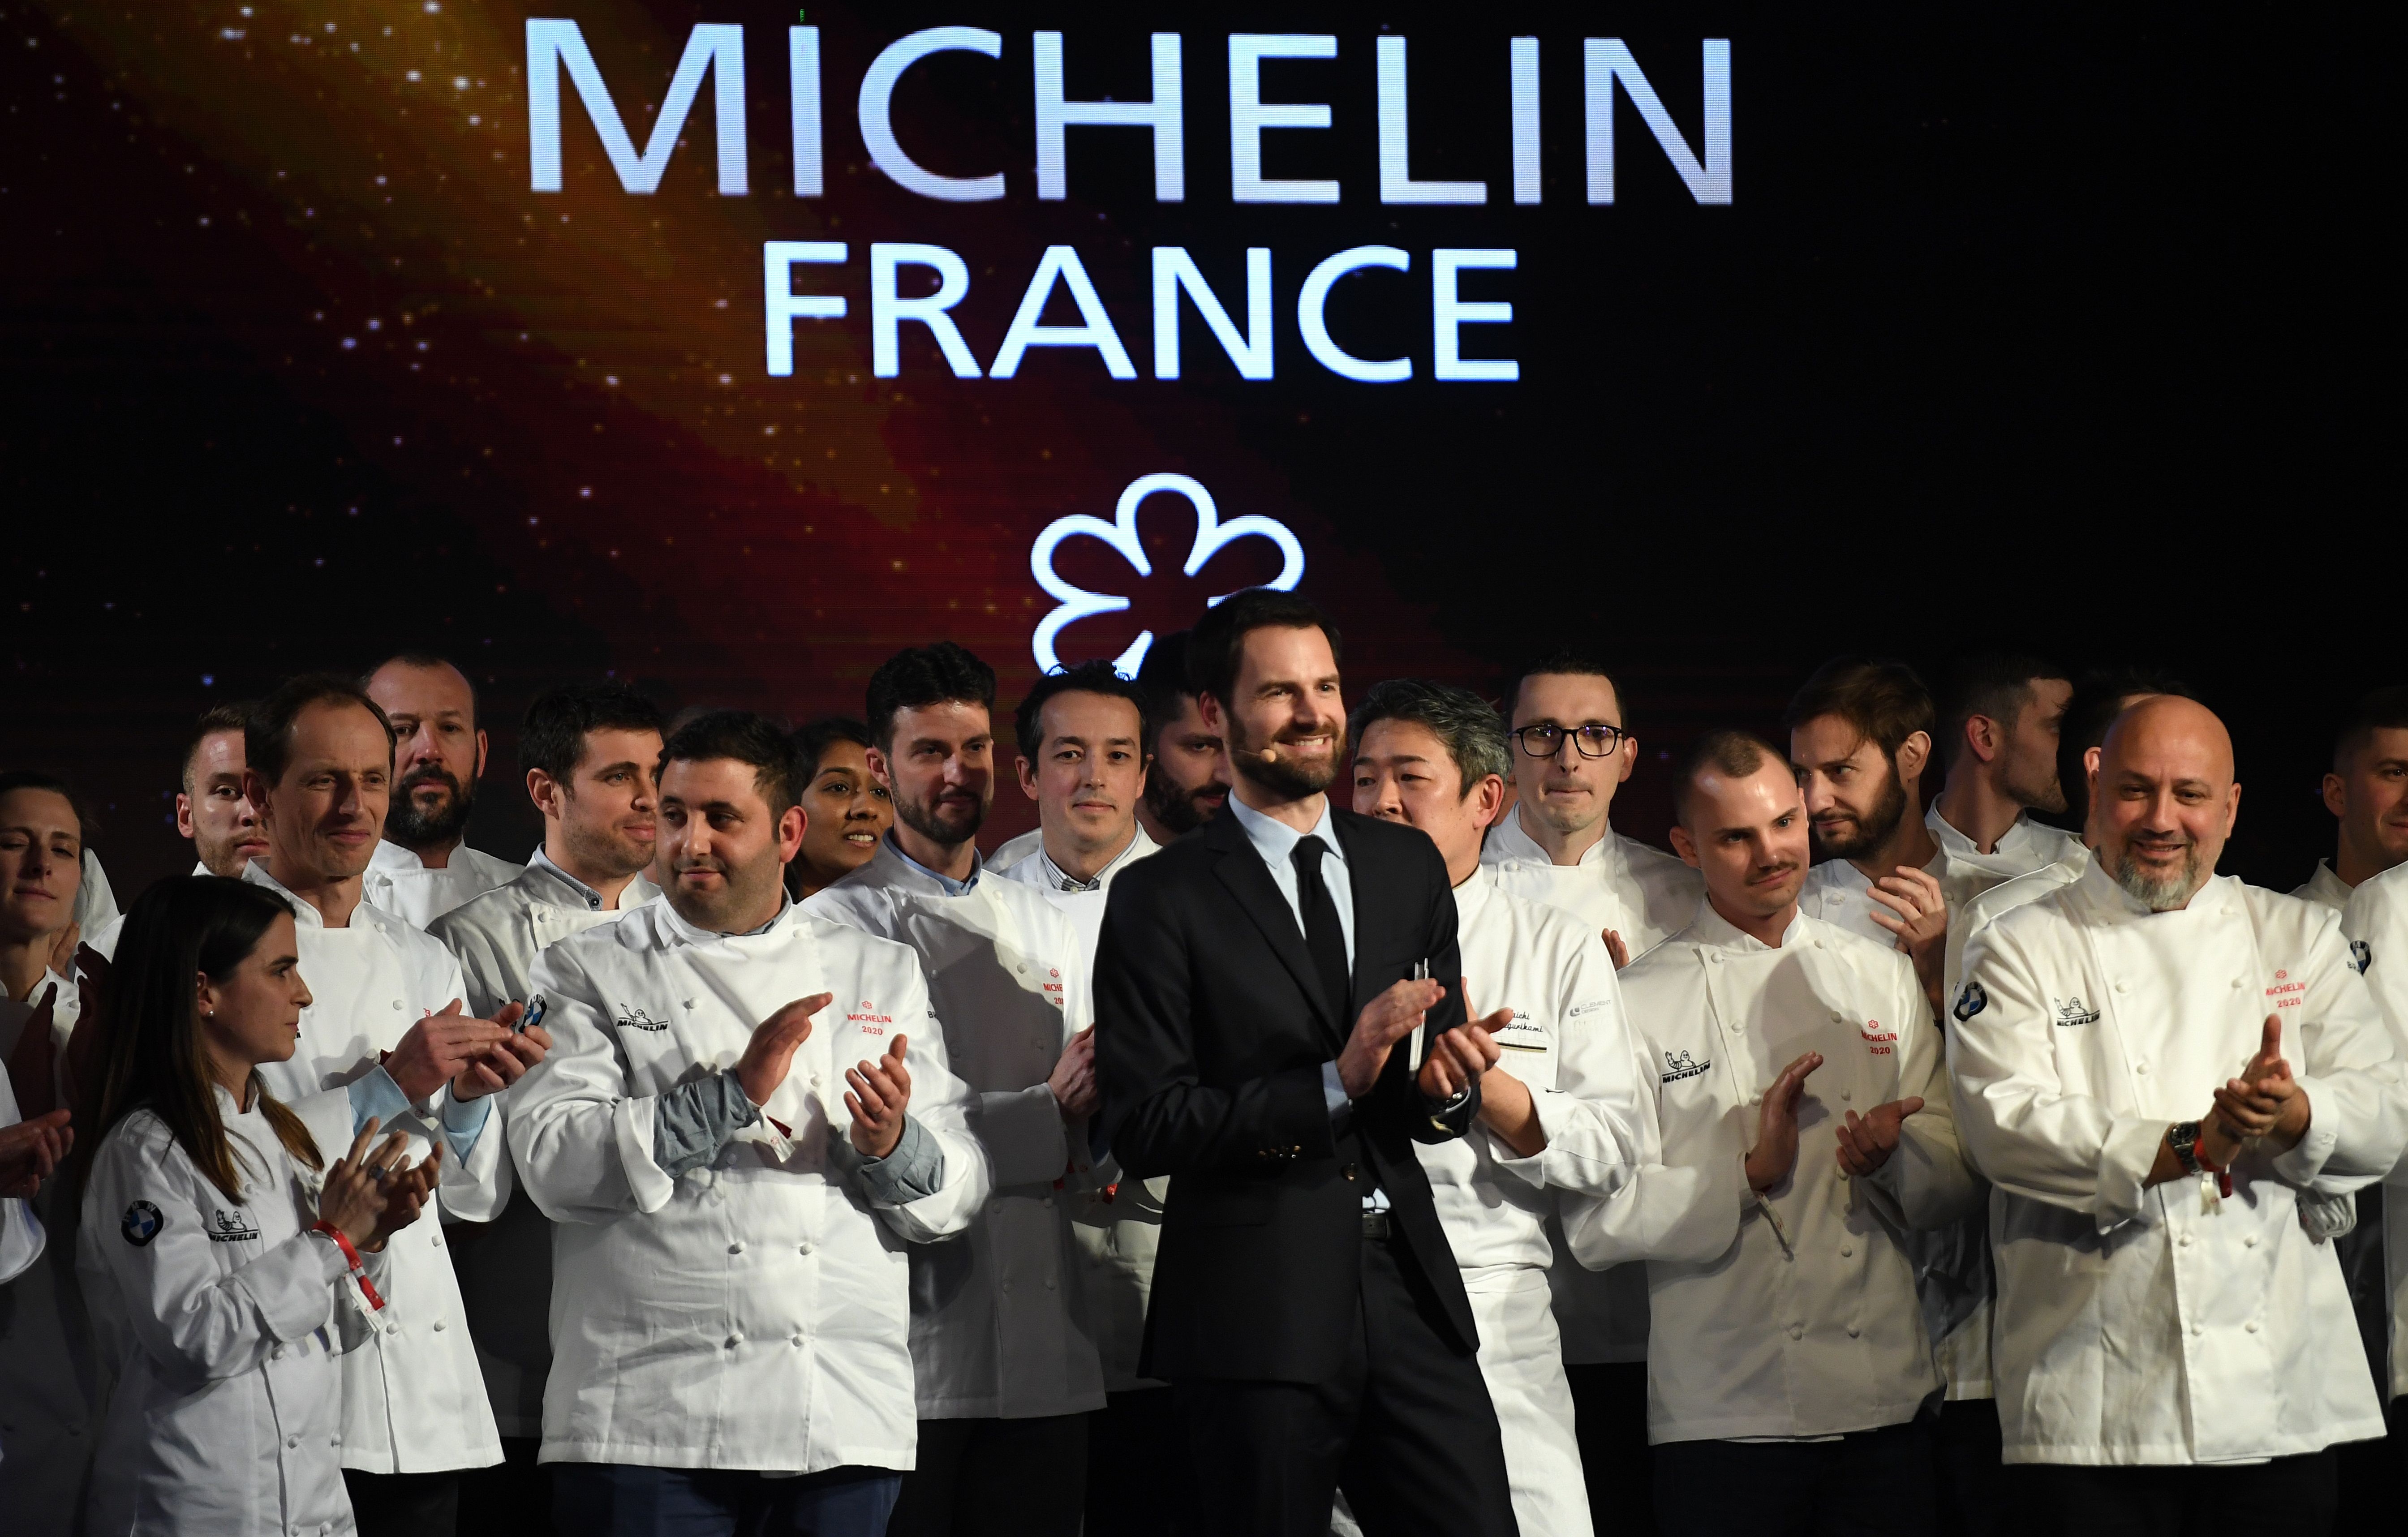 People on stage in front of a Michelin sign